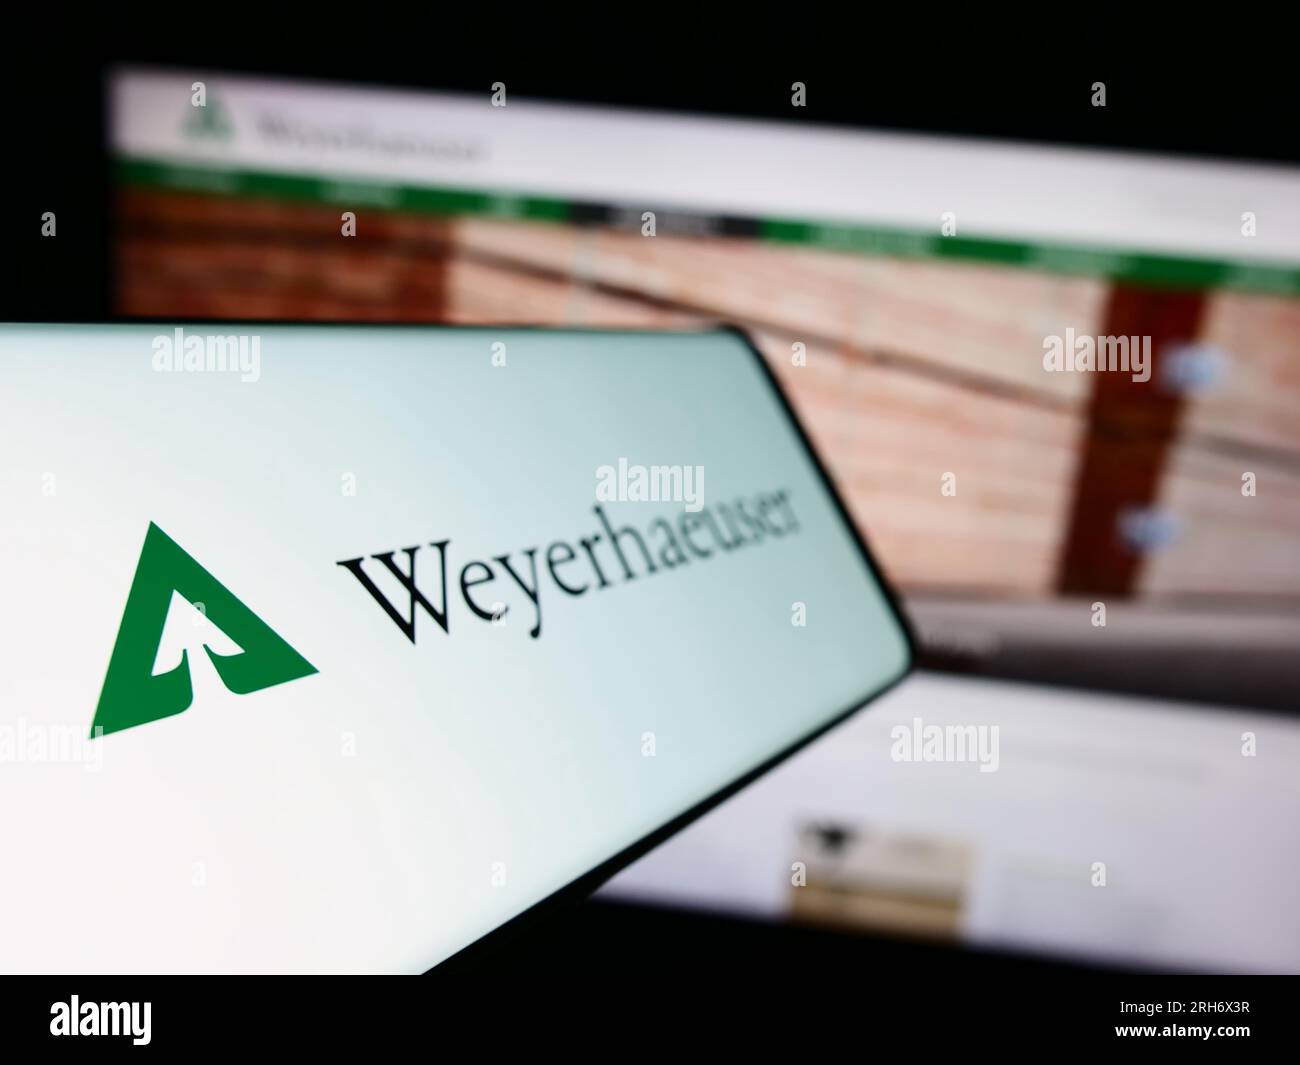 Cellphone with logo of US timberland business Weyerhaeuser Company on screen in front of business website. Focus on left of phone display. Stock Photo